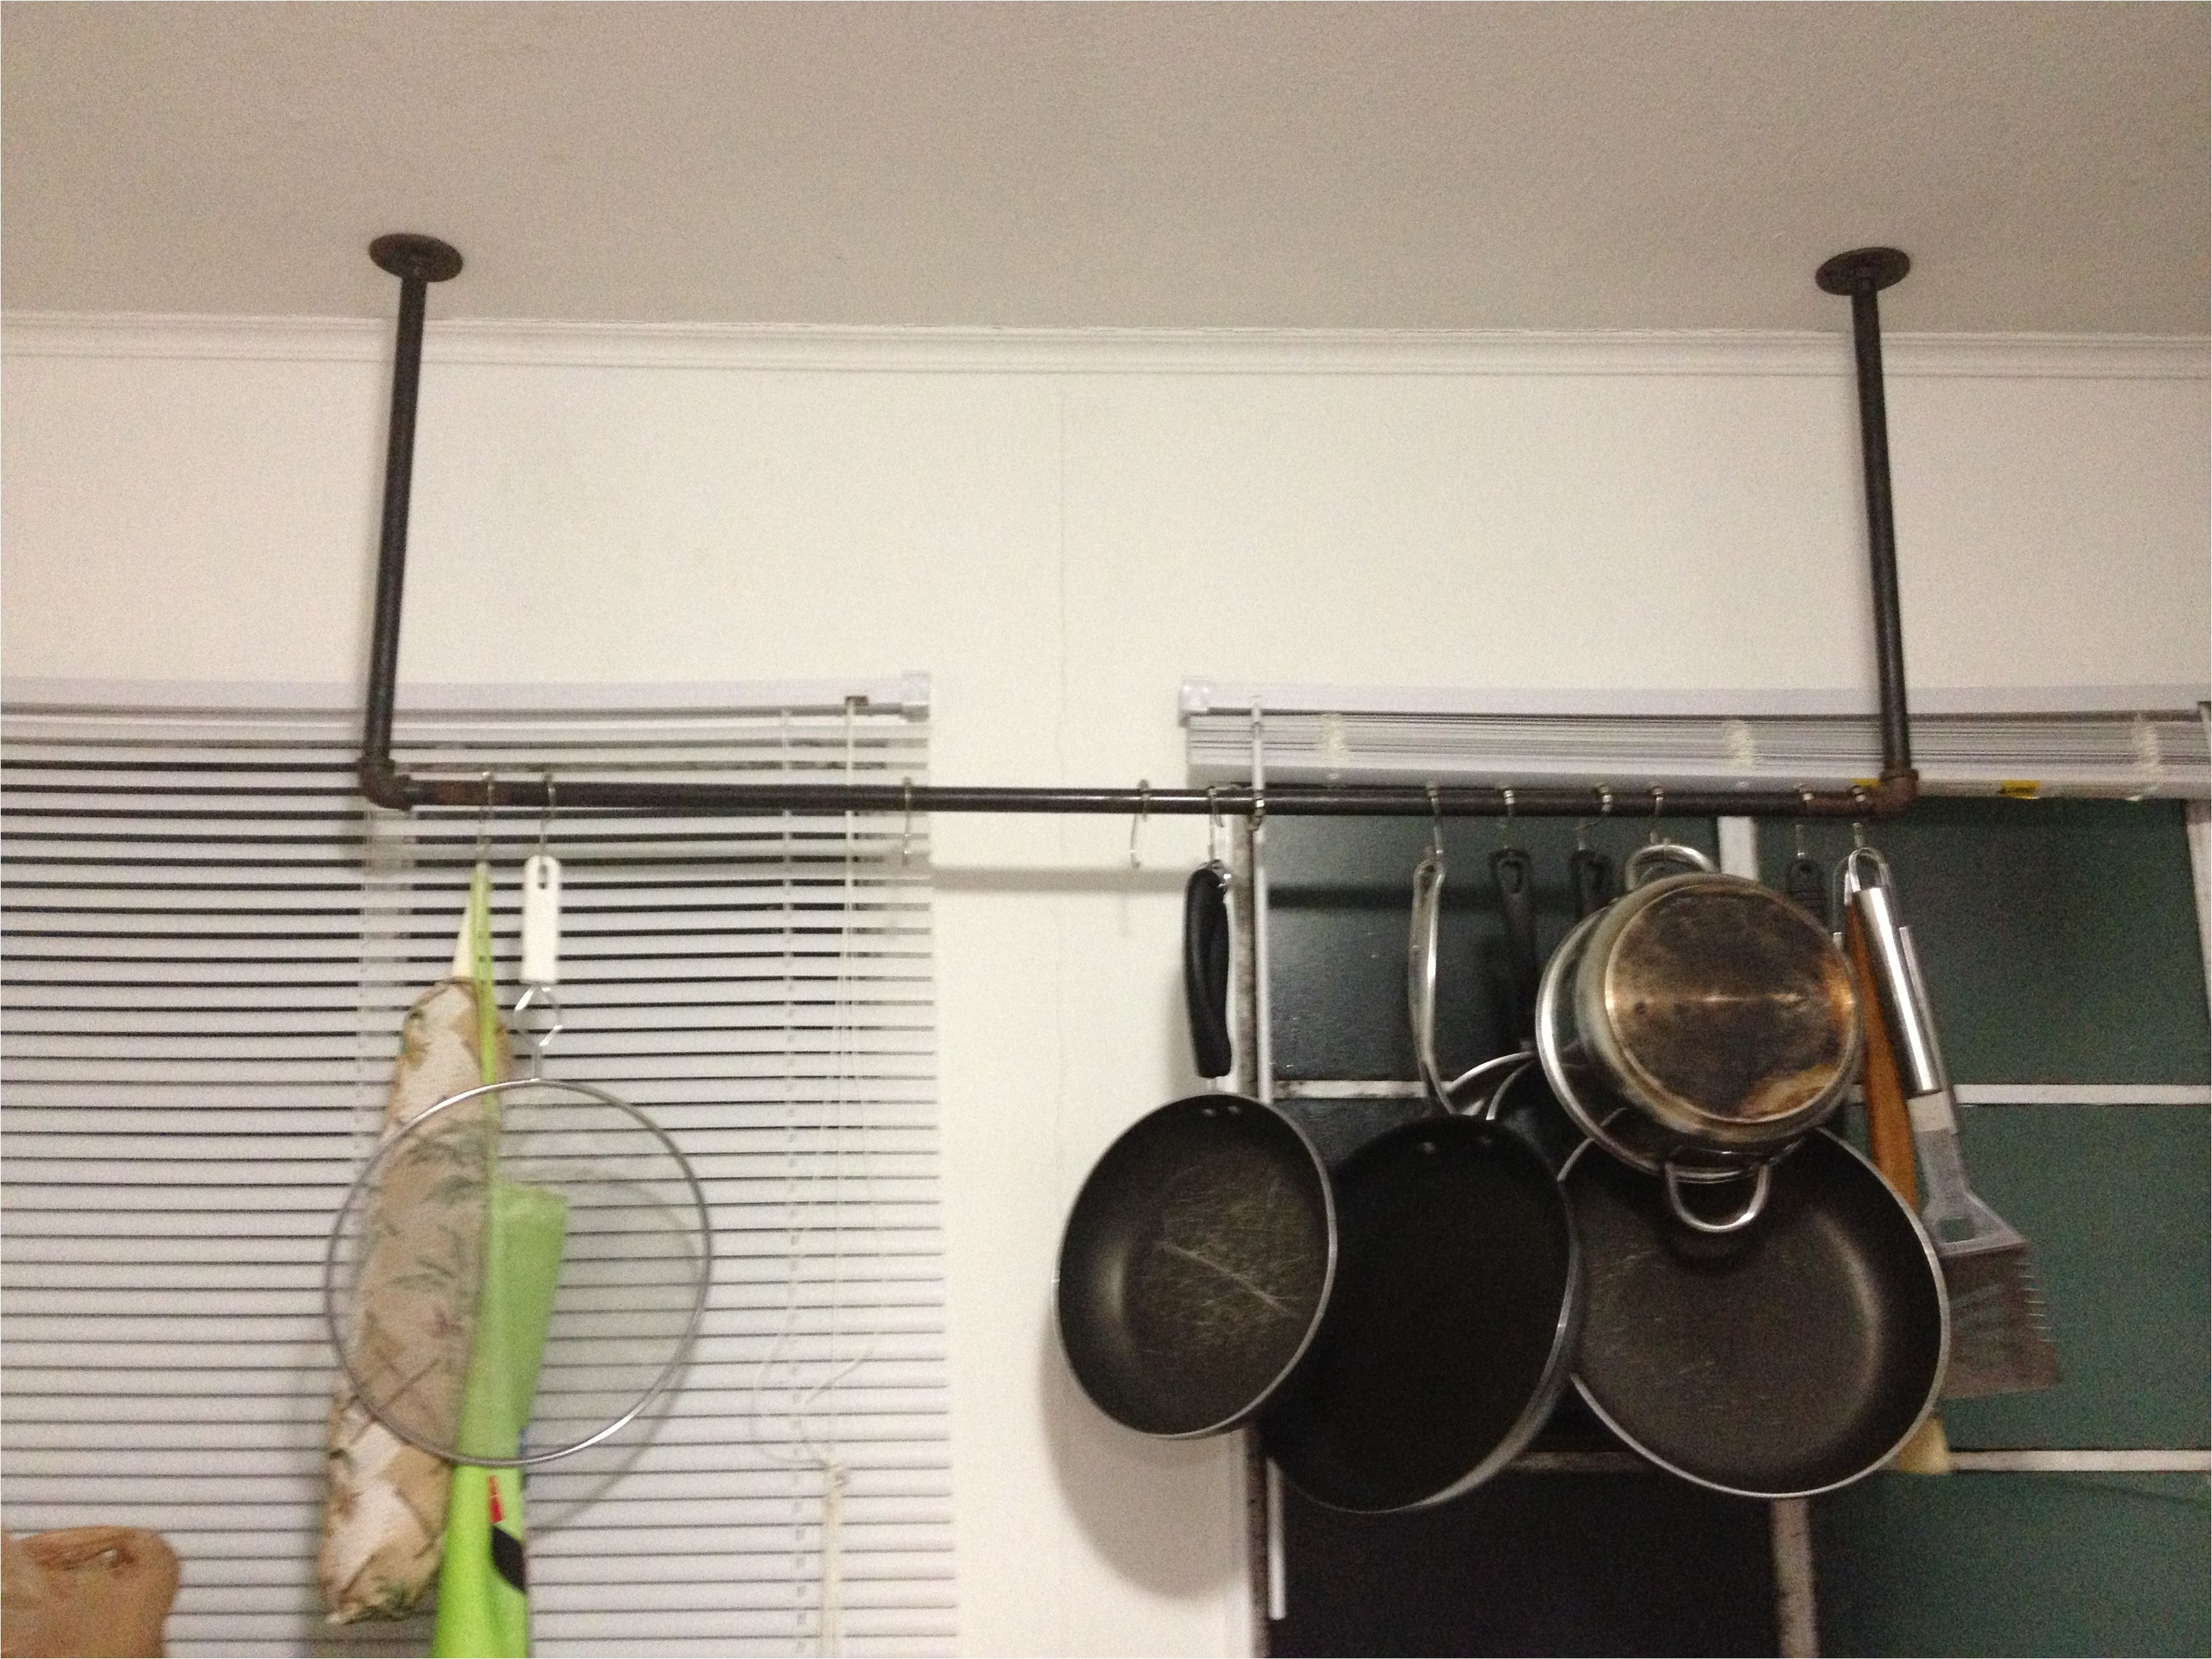 diy pot and pan rack so cheap and easy to make black iron pipe has threading for easy assembly you can find it at any hardware store to hang the pots i